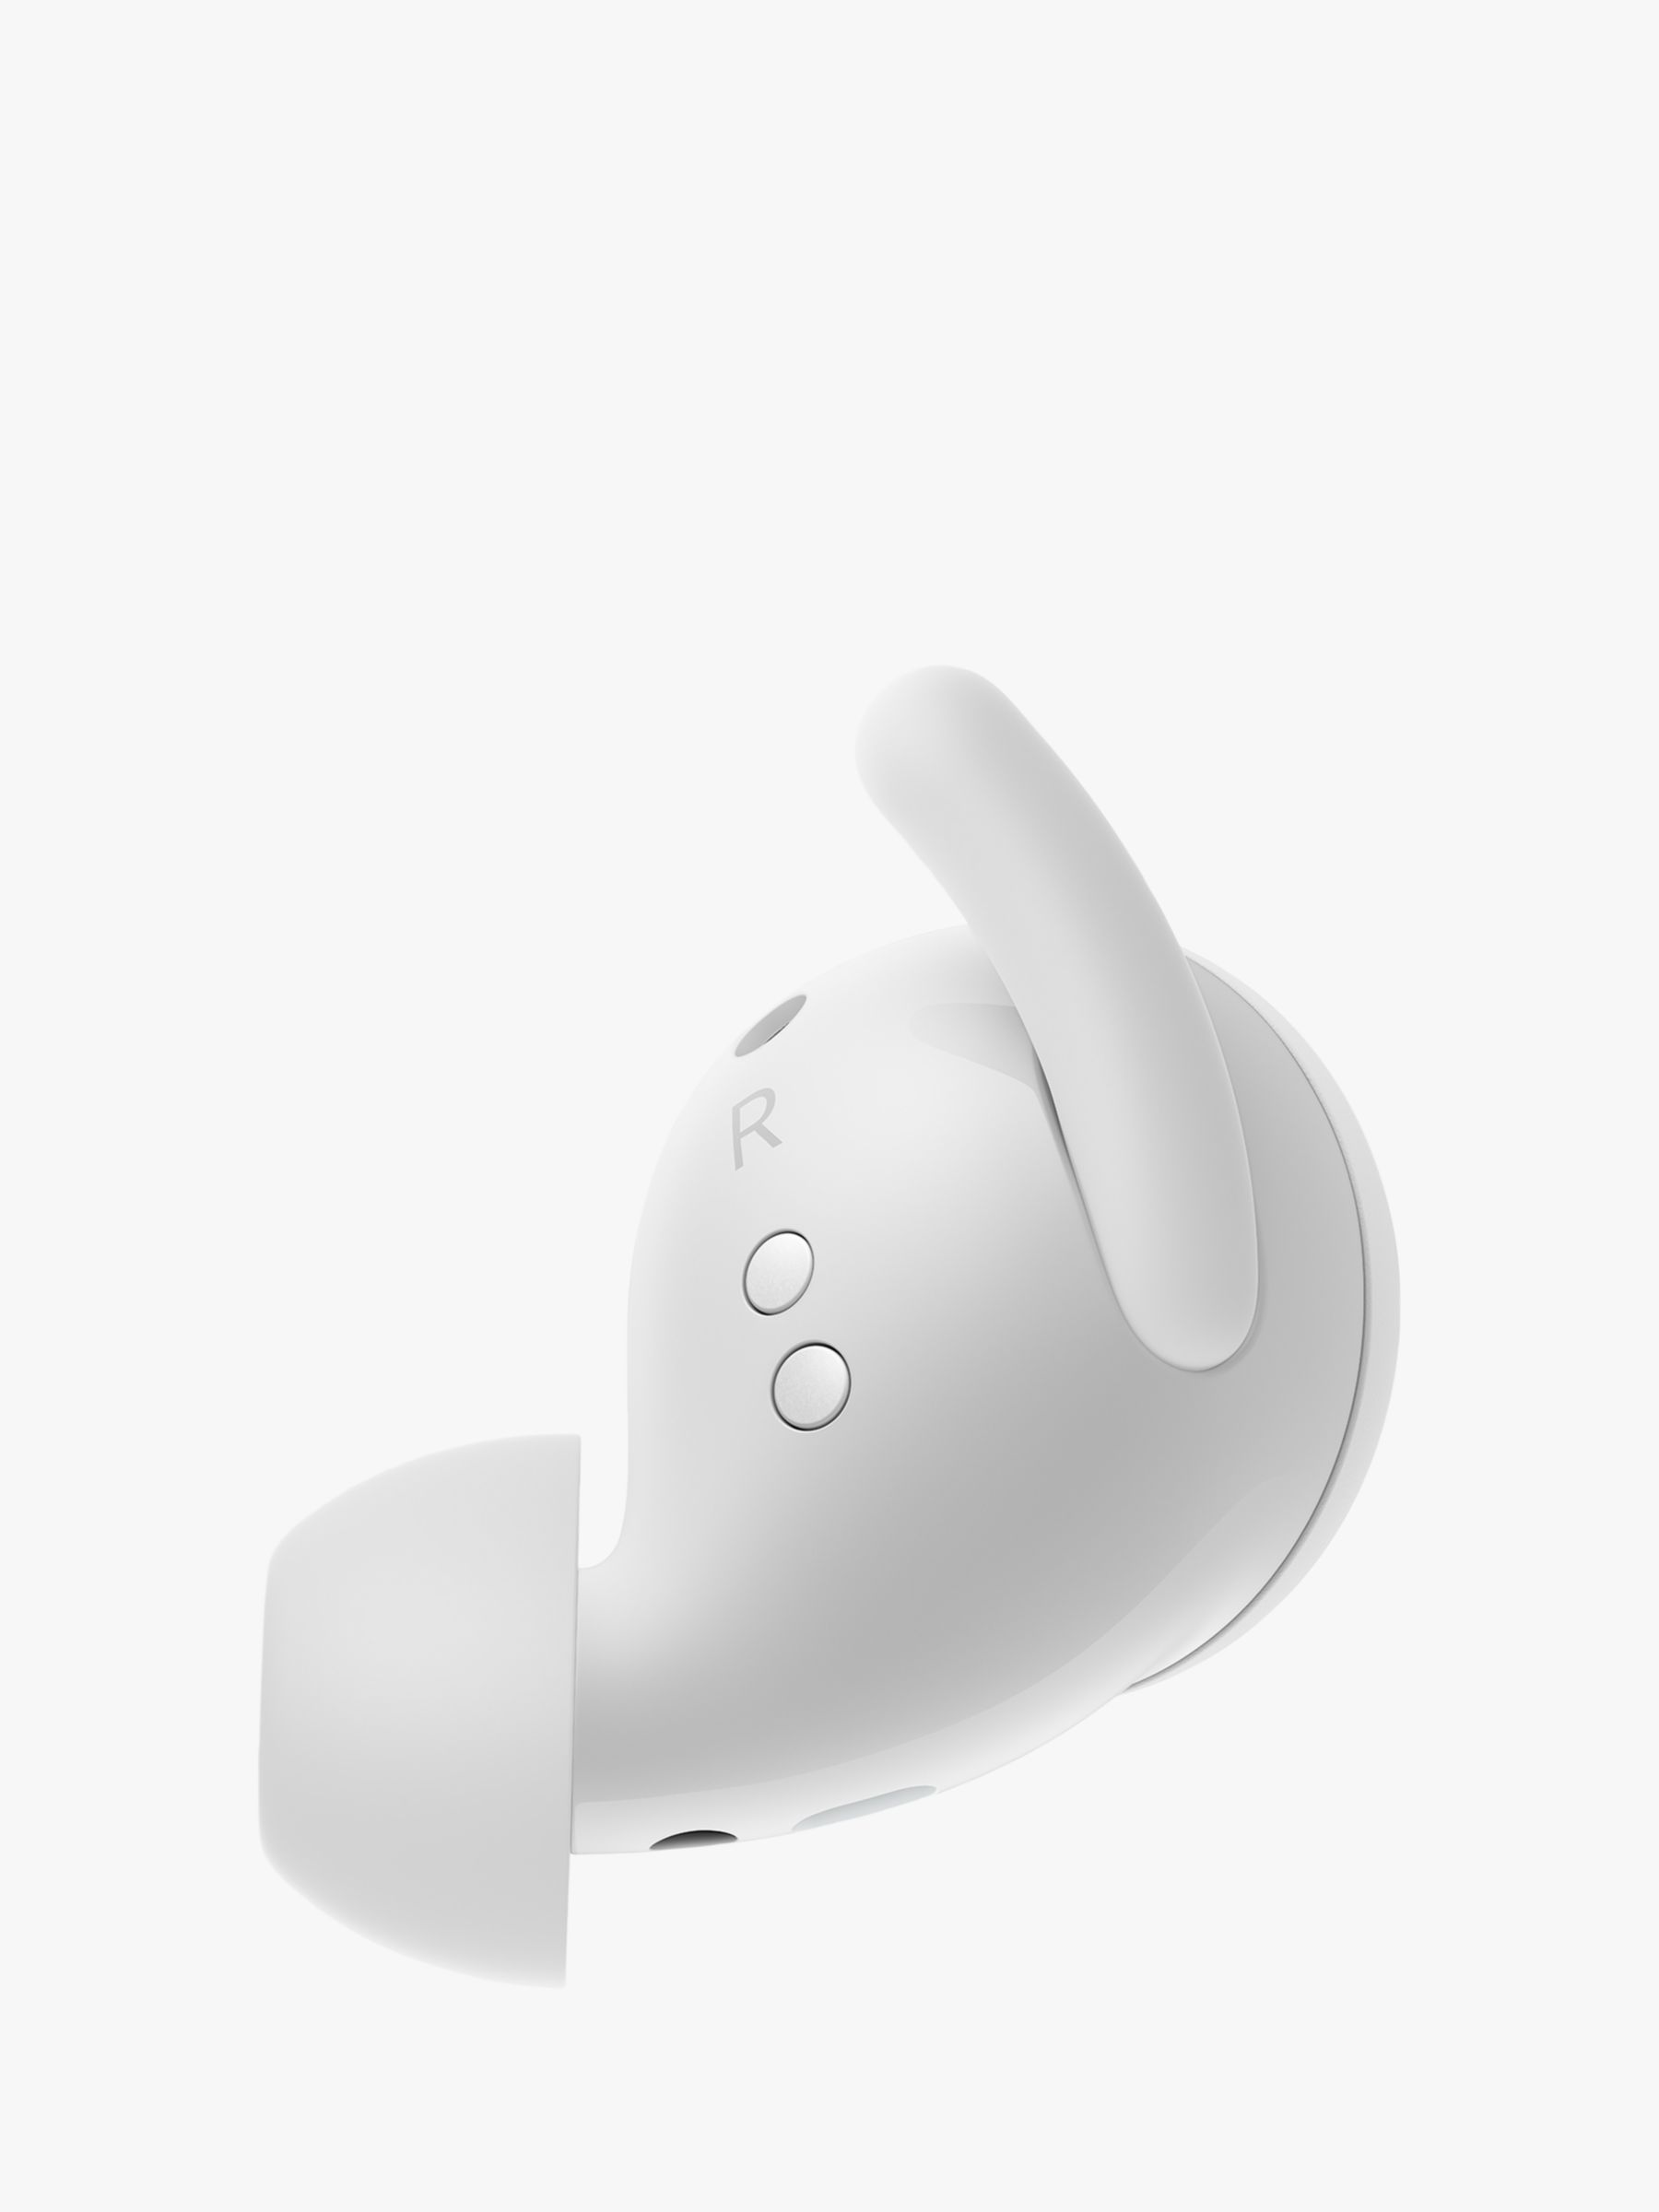 Google Pixel Buds A-Series Truly Wireless Earbuds - Clearly White